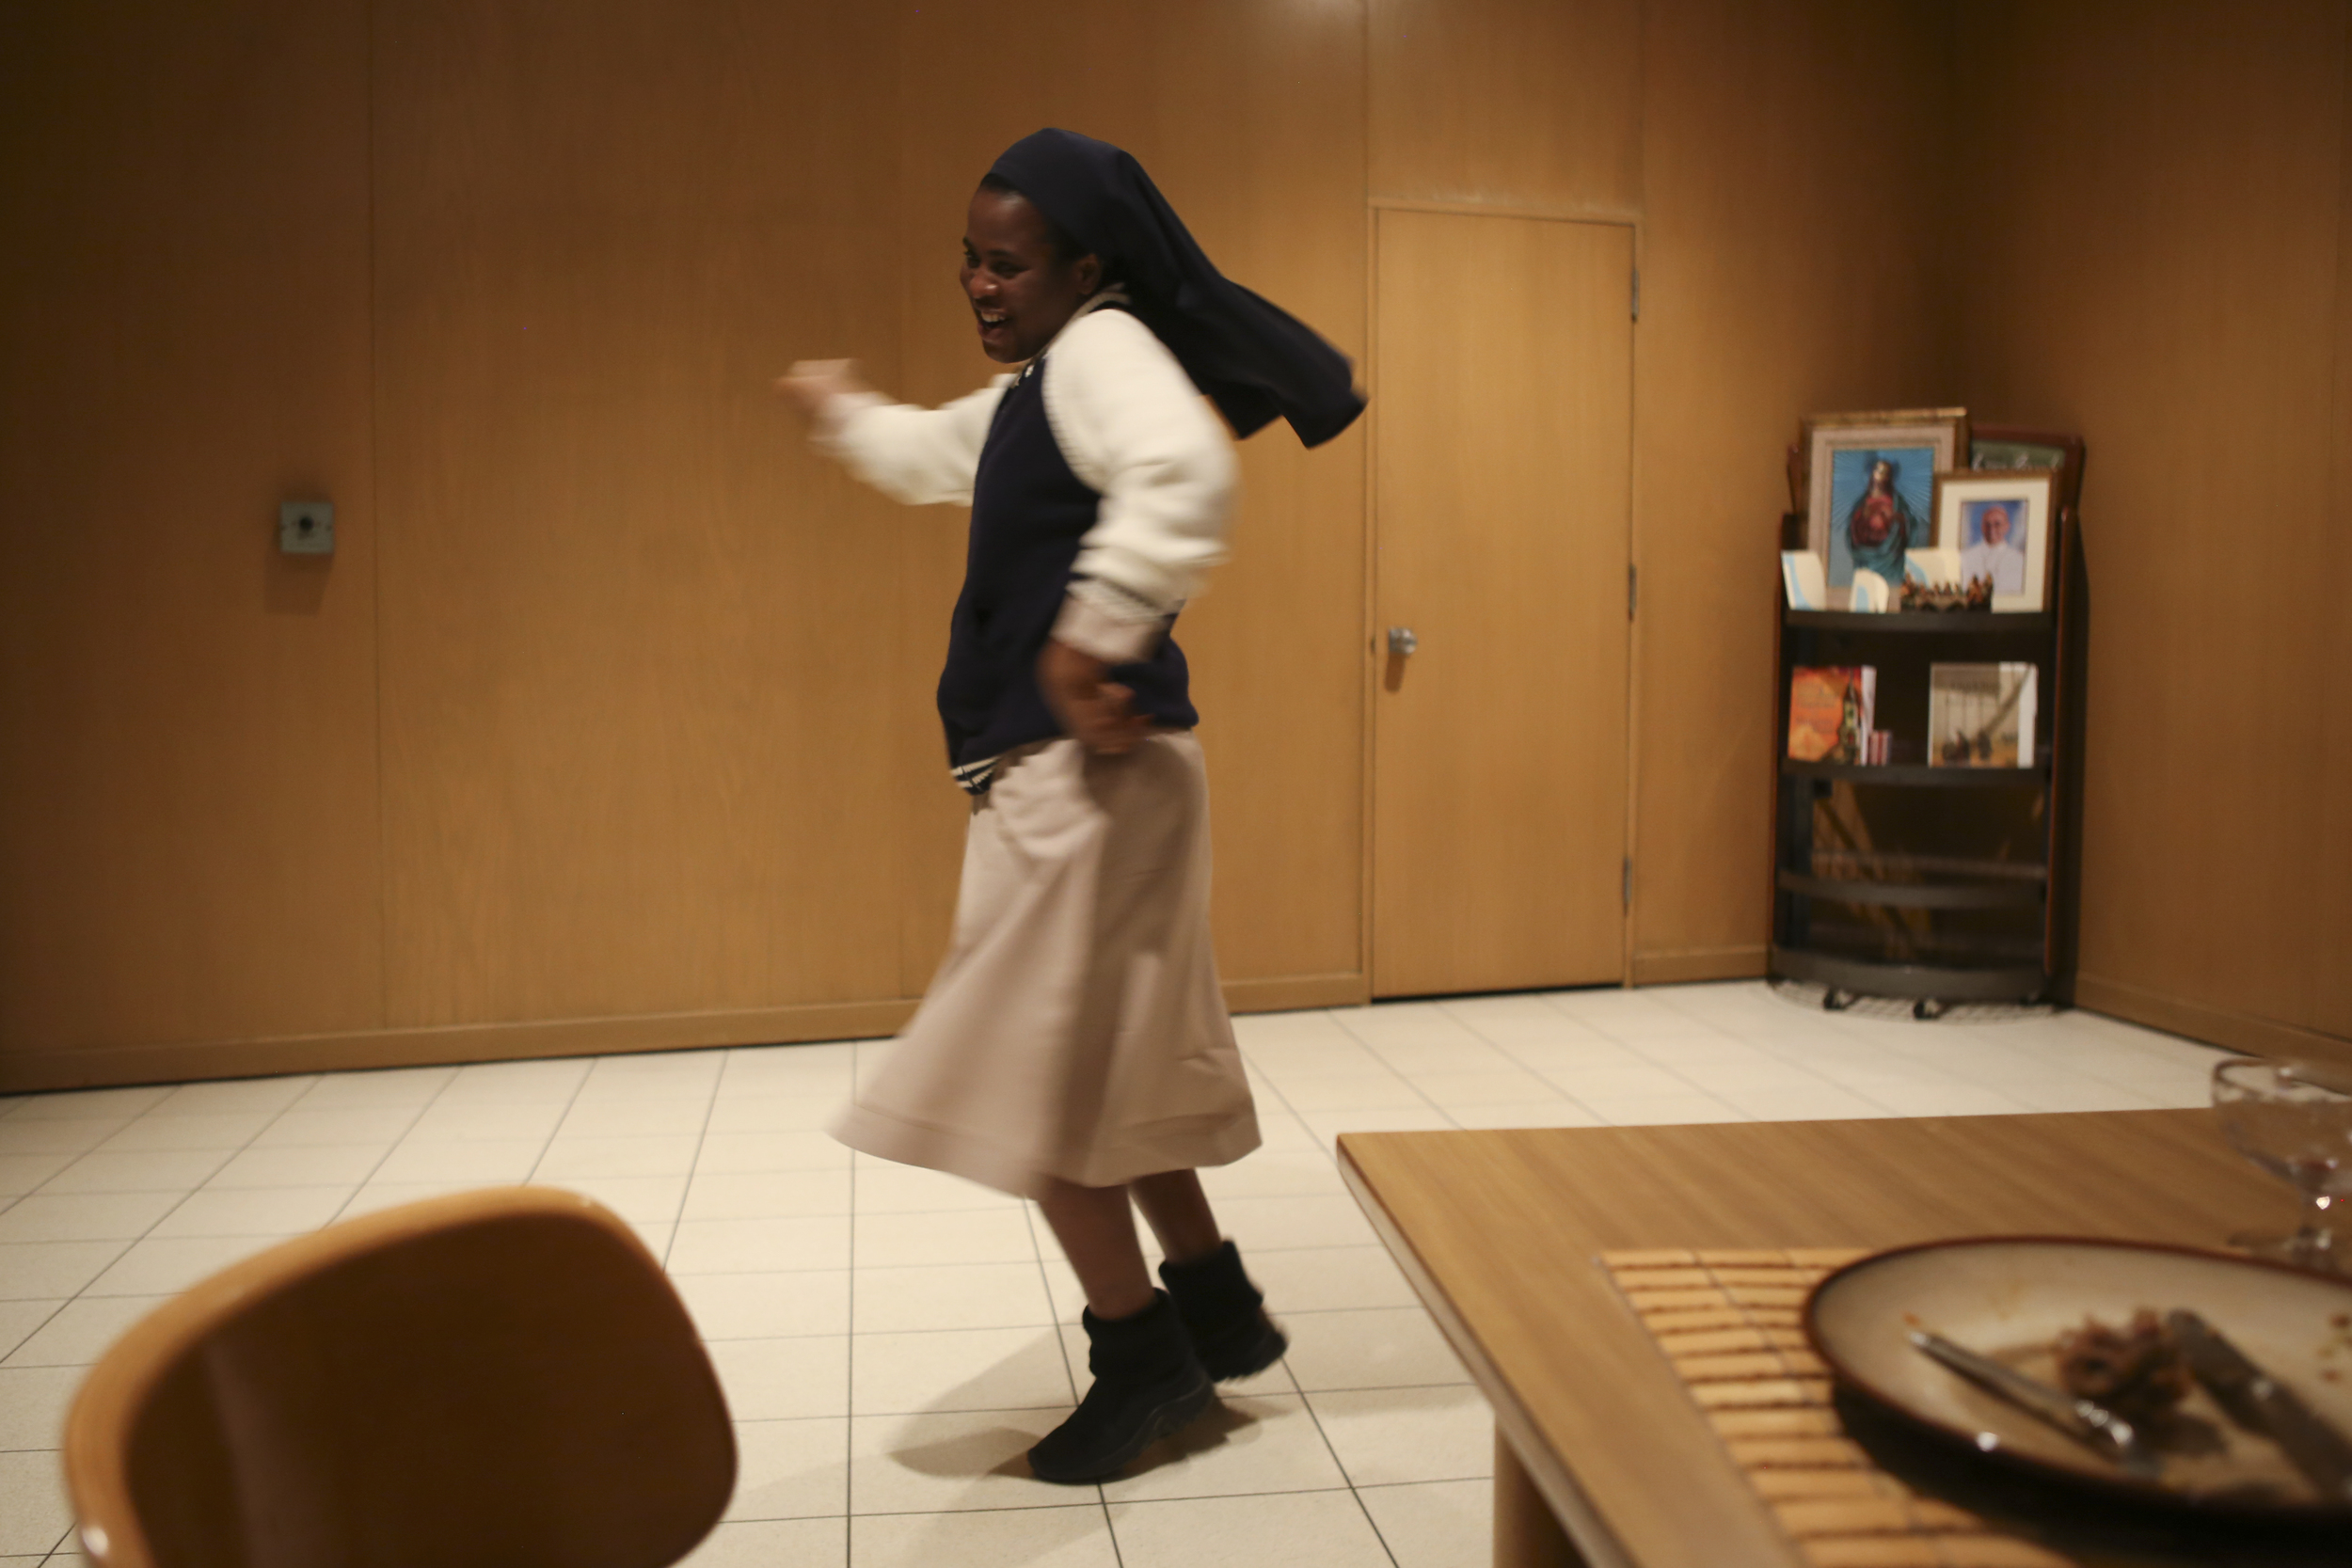  Sister Evelyn does a Bollywood dance after dinner at the convent house in Yonkers.    